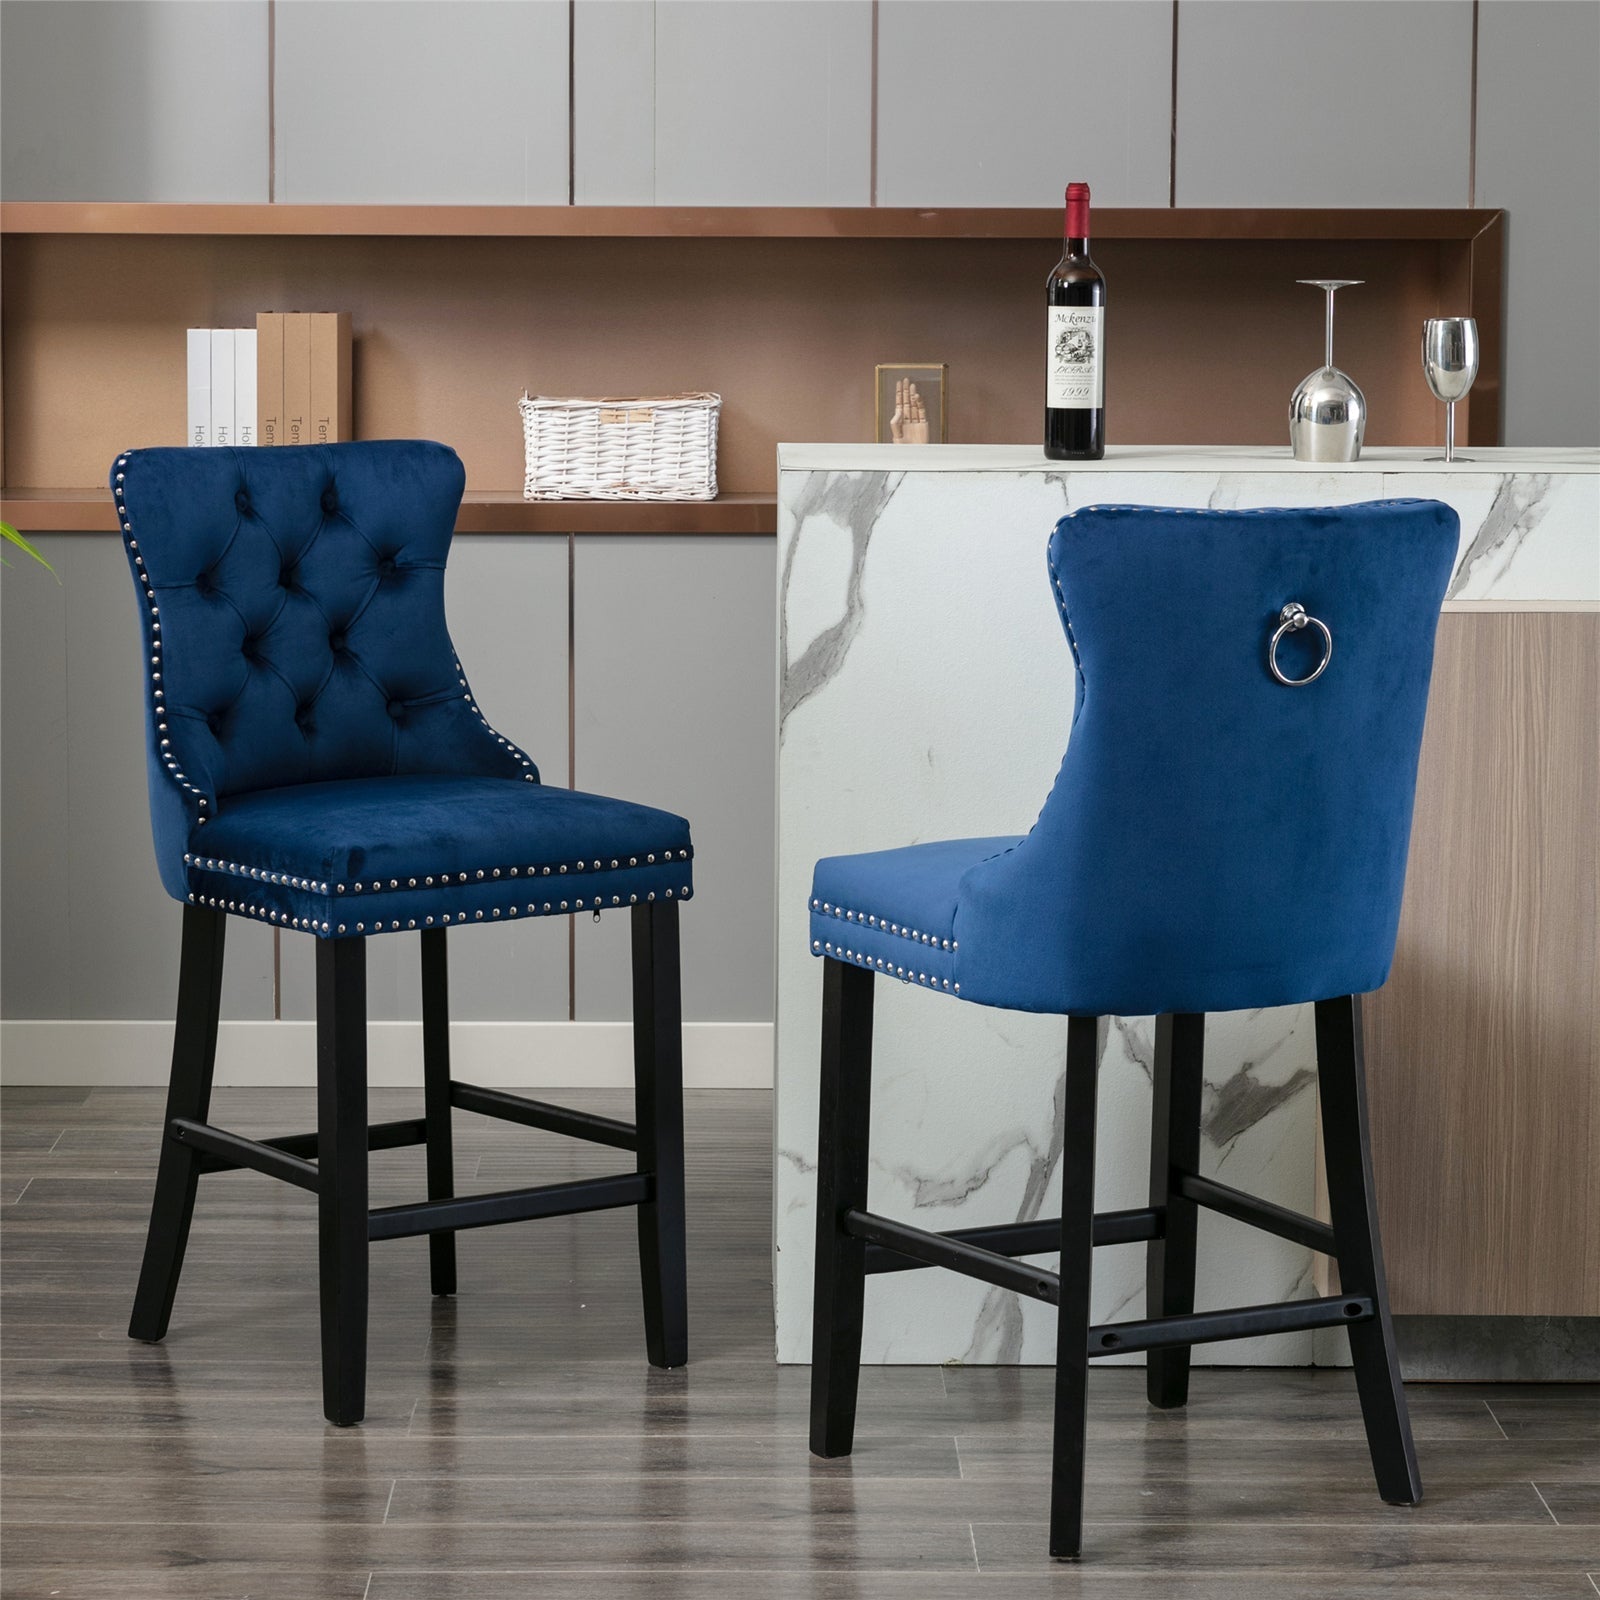 2X Velvet Bar Stools with Studs Trim Wooden Legs Tufted Dining Chairs Kitchen - image1